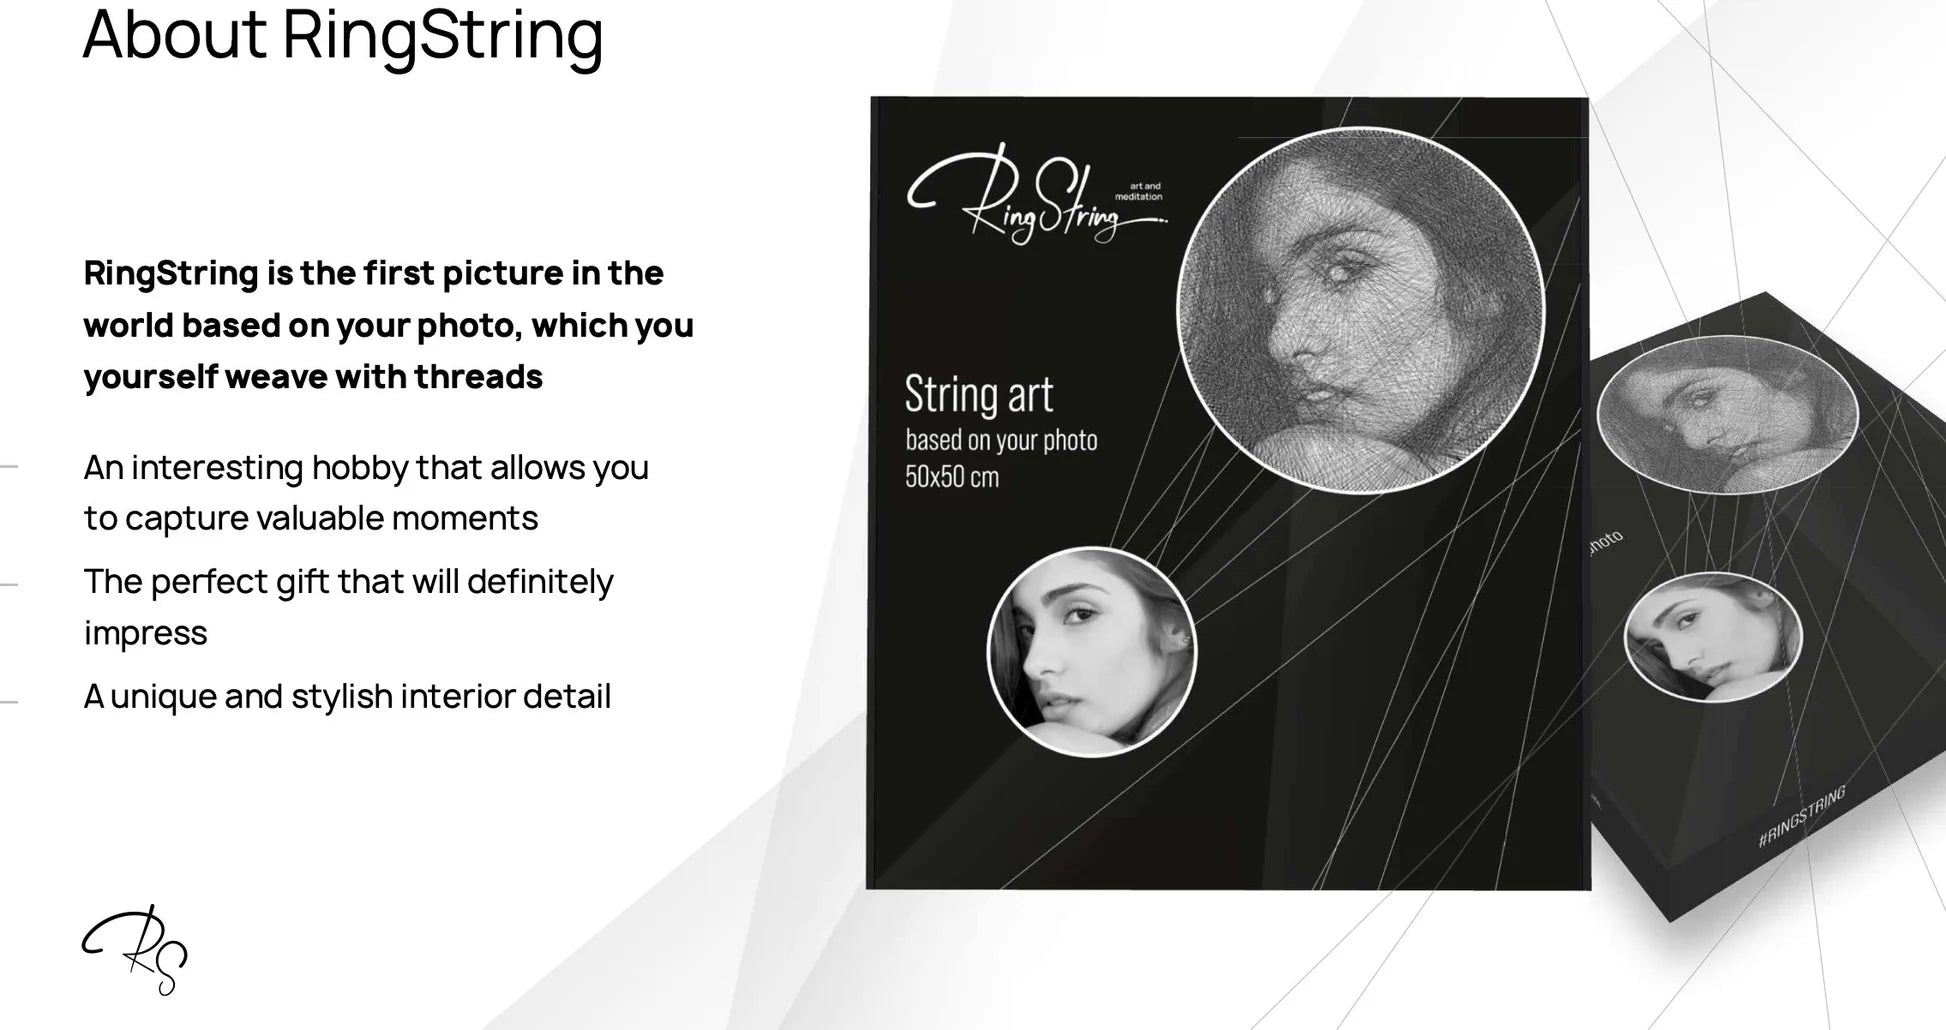 How RingString art kit Transforms Your Photos to string art masterpiece